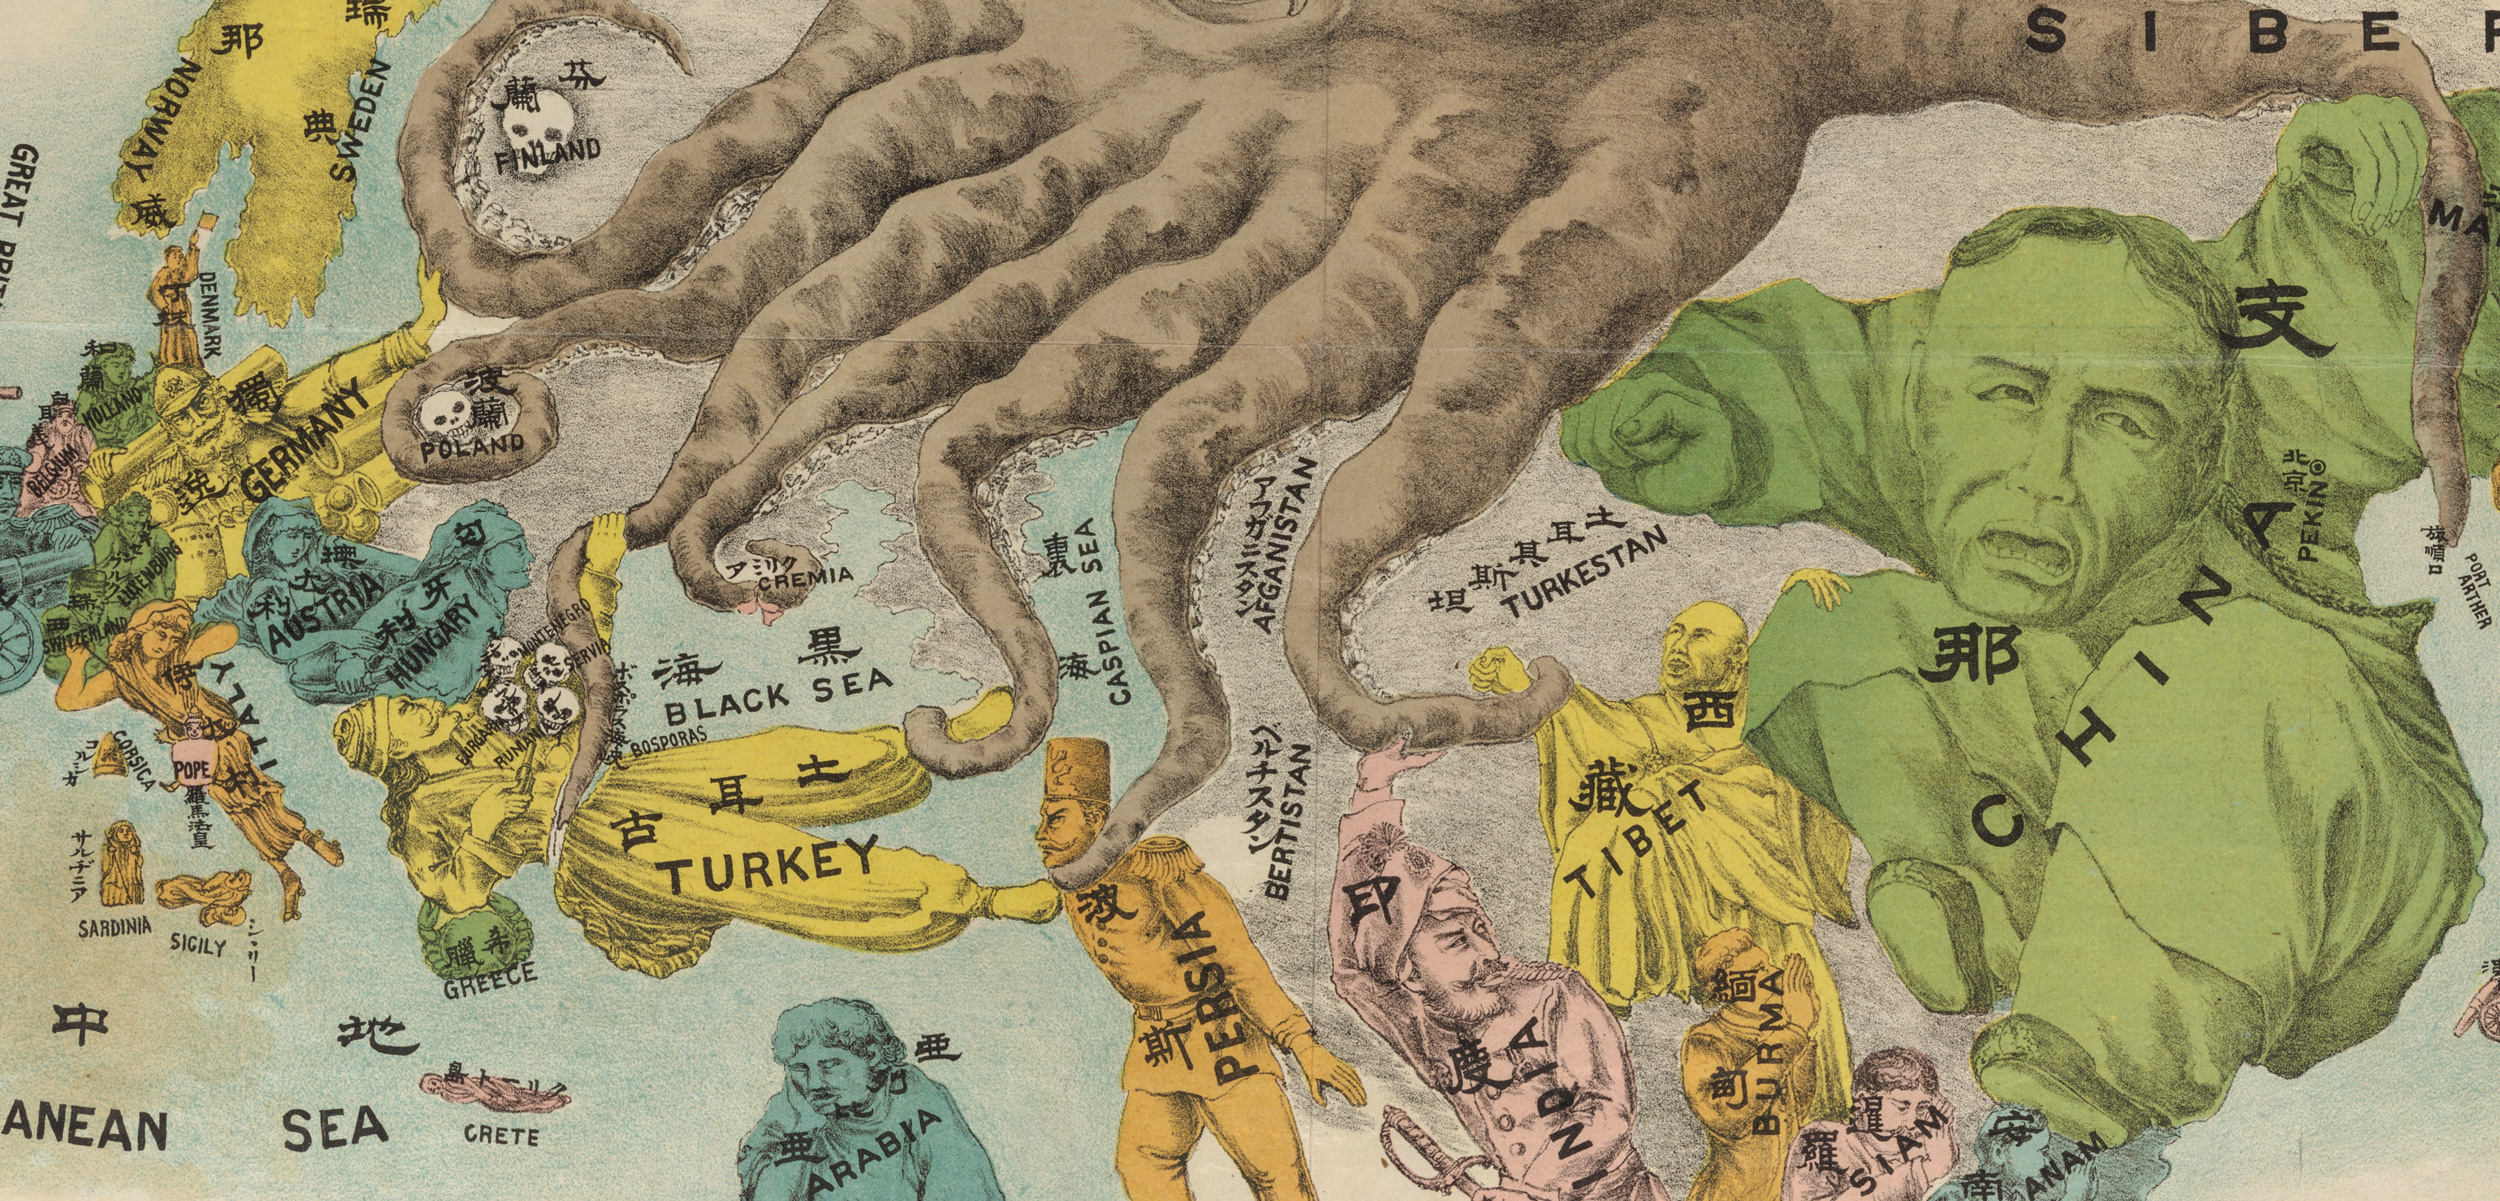 Octopuses are popular among makers of persuasive maps, like this one from P. J. Mode’s collection housed at Cornell University. Photo courtesy of Cornell University Persuasive Cartography Collection